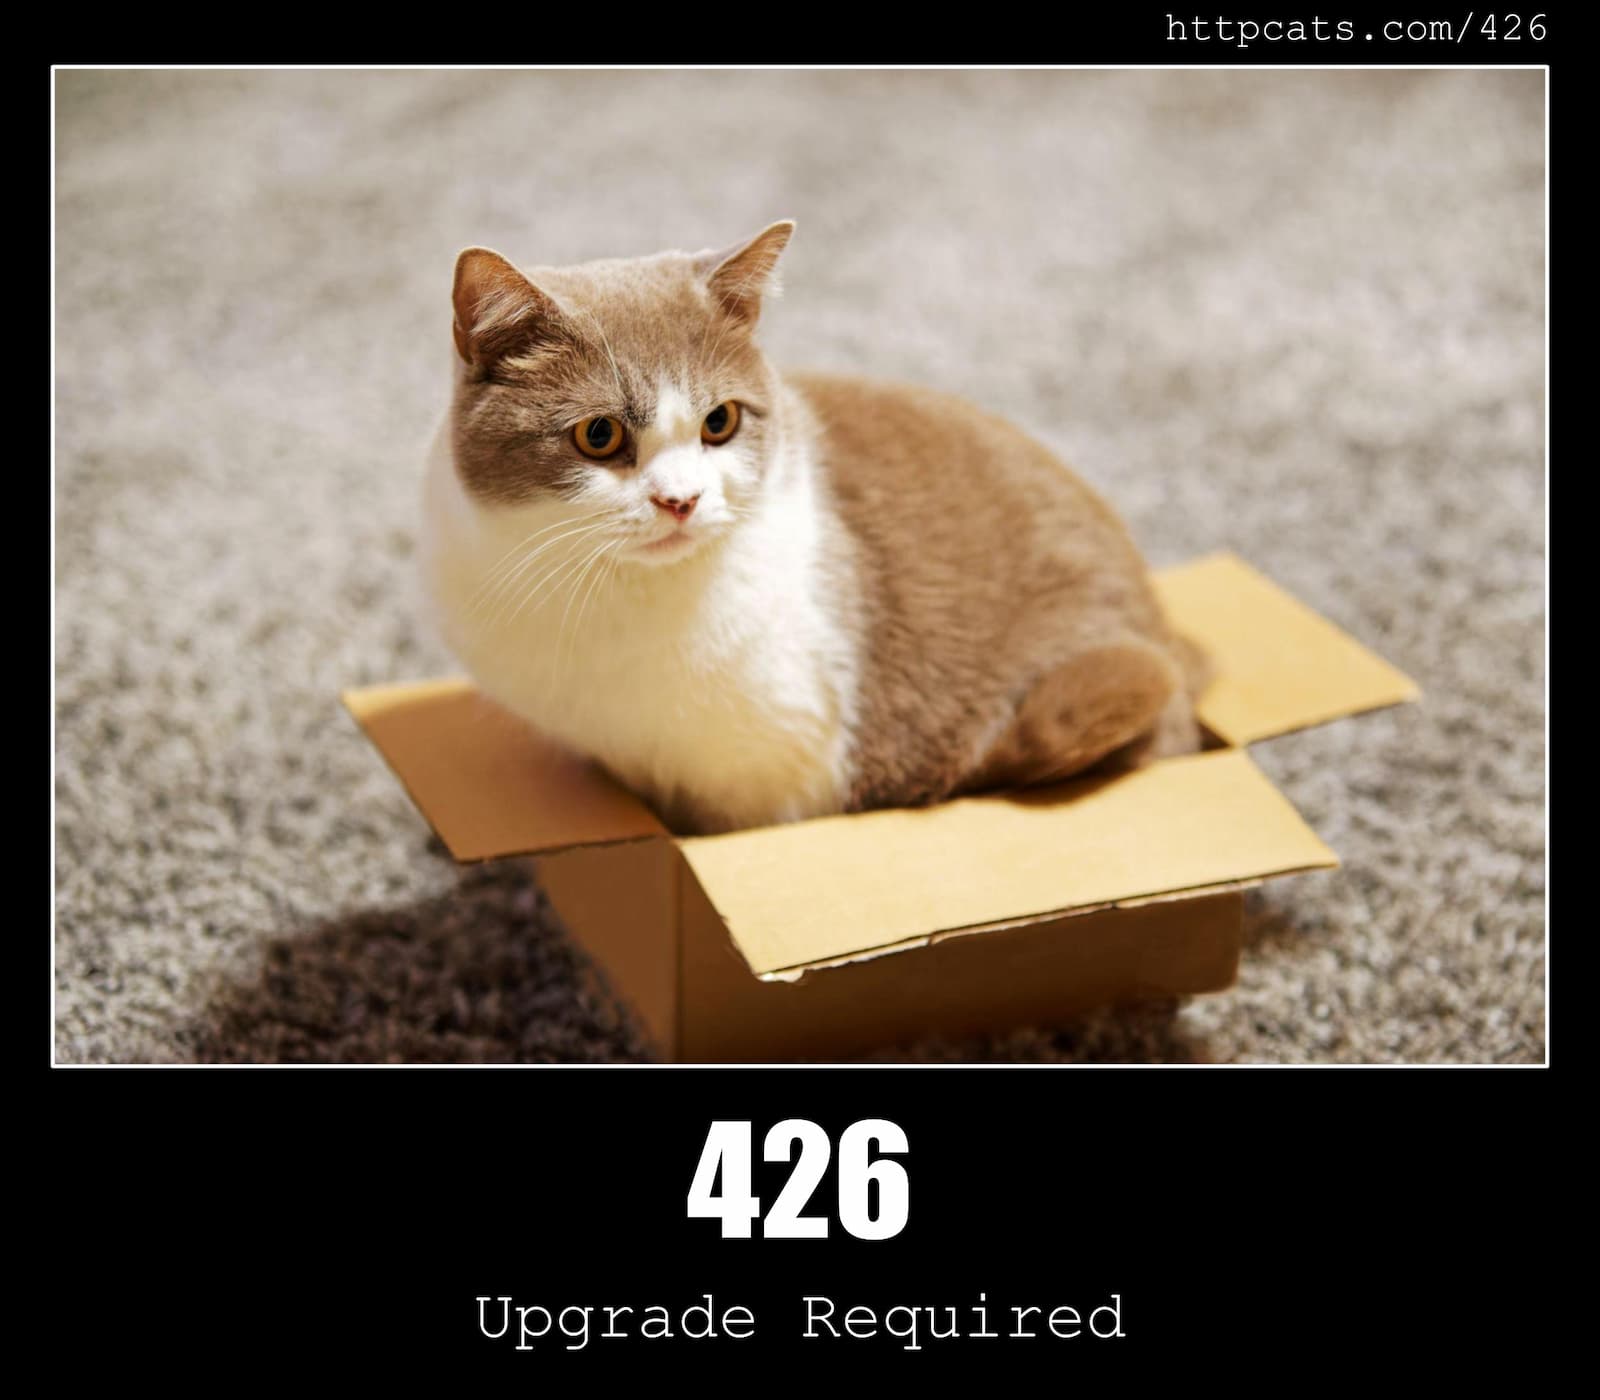 HTTP Status Code 426 Upgrade Required & Cats